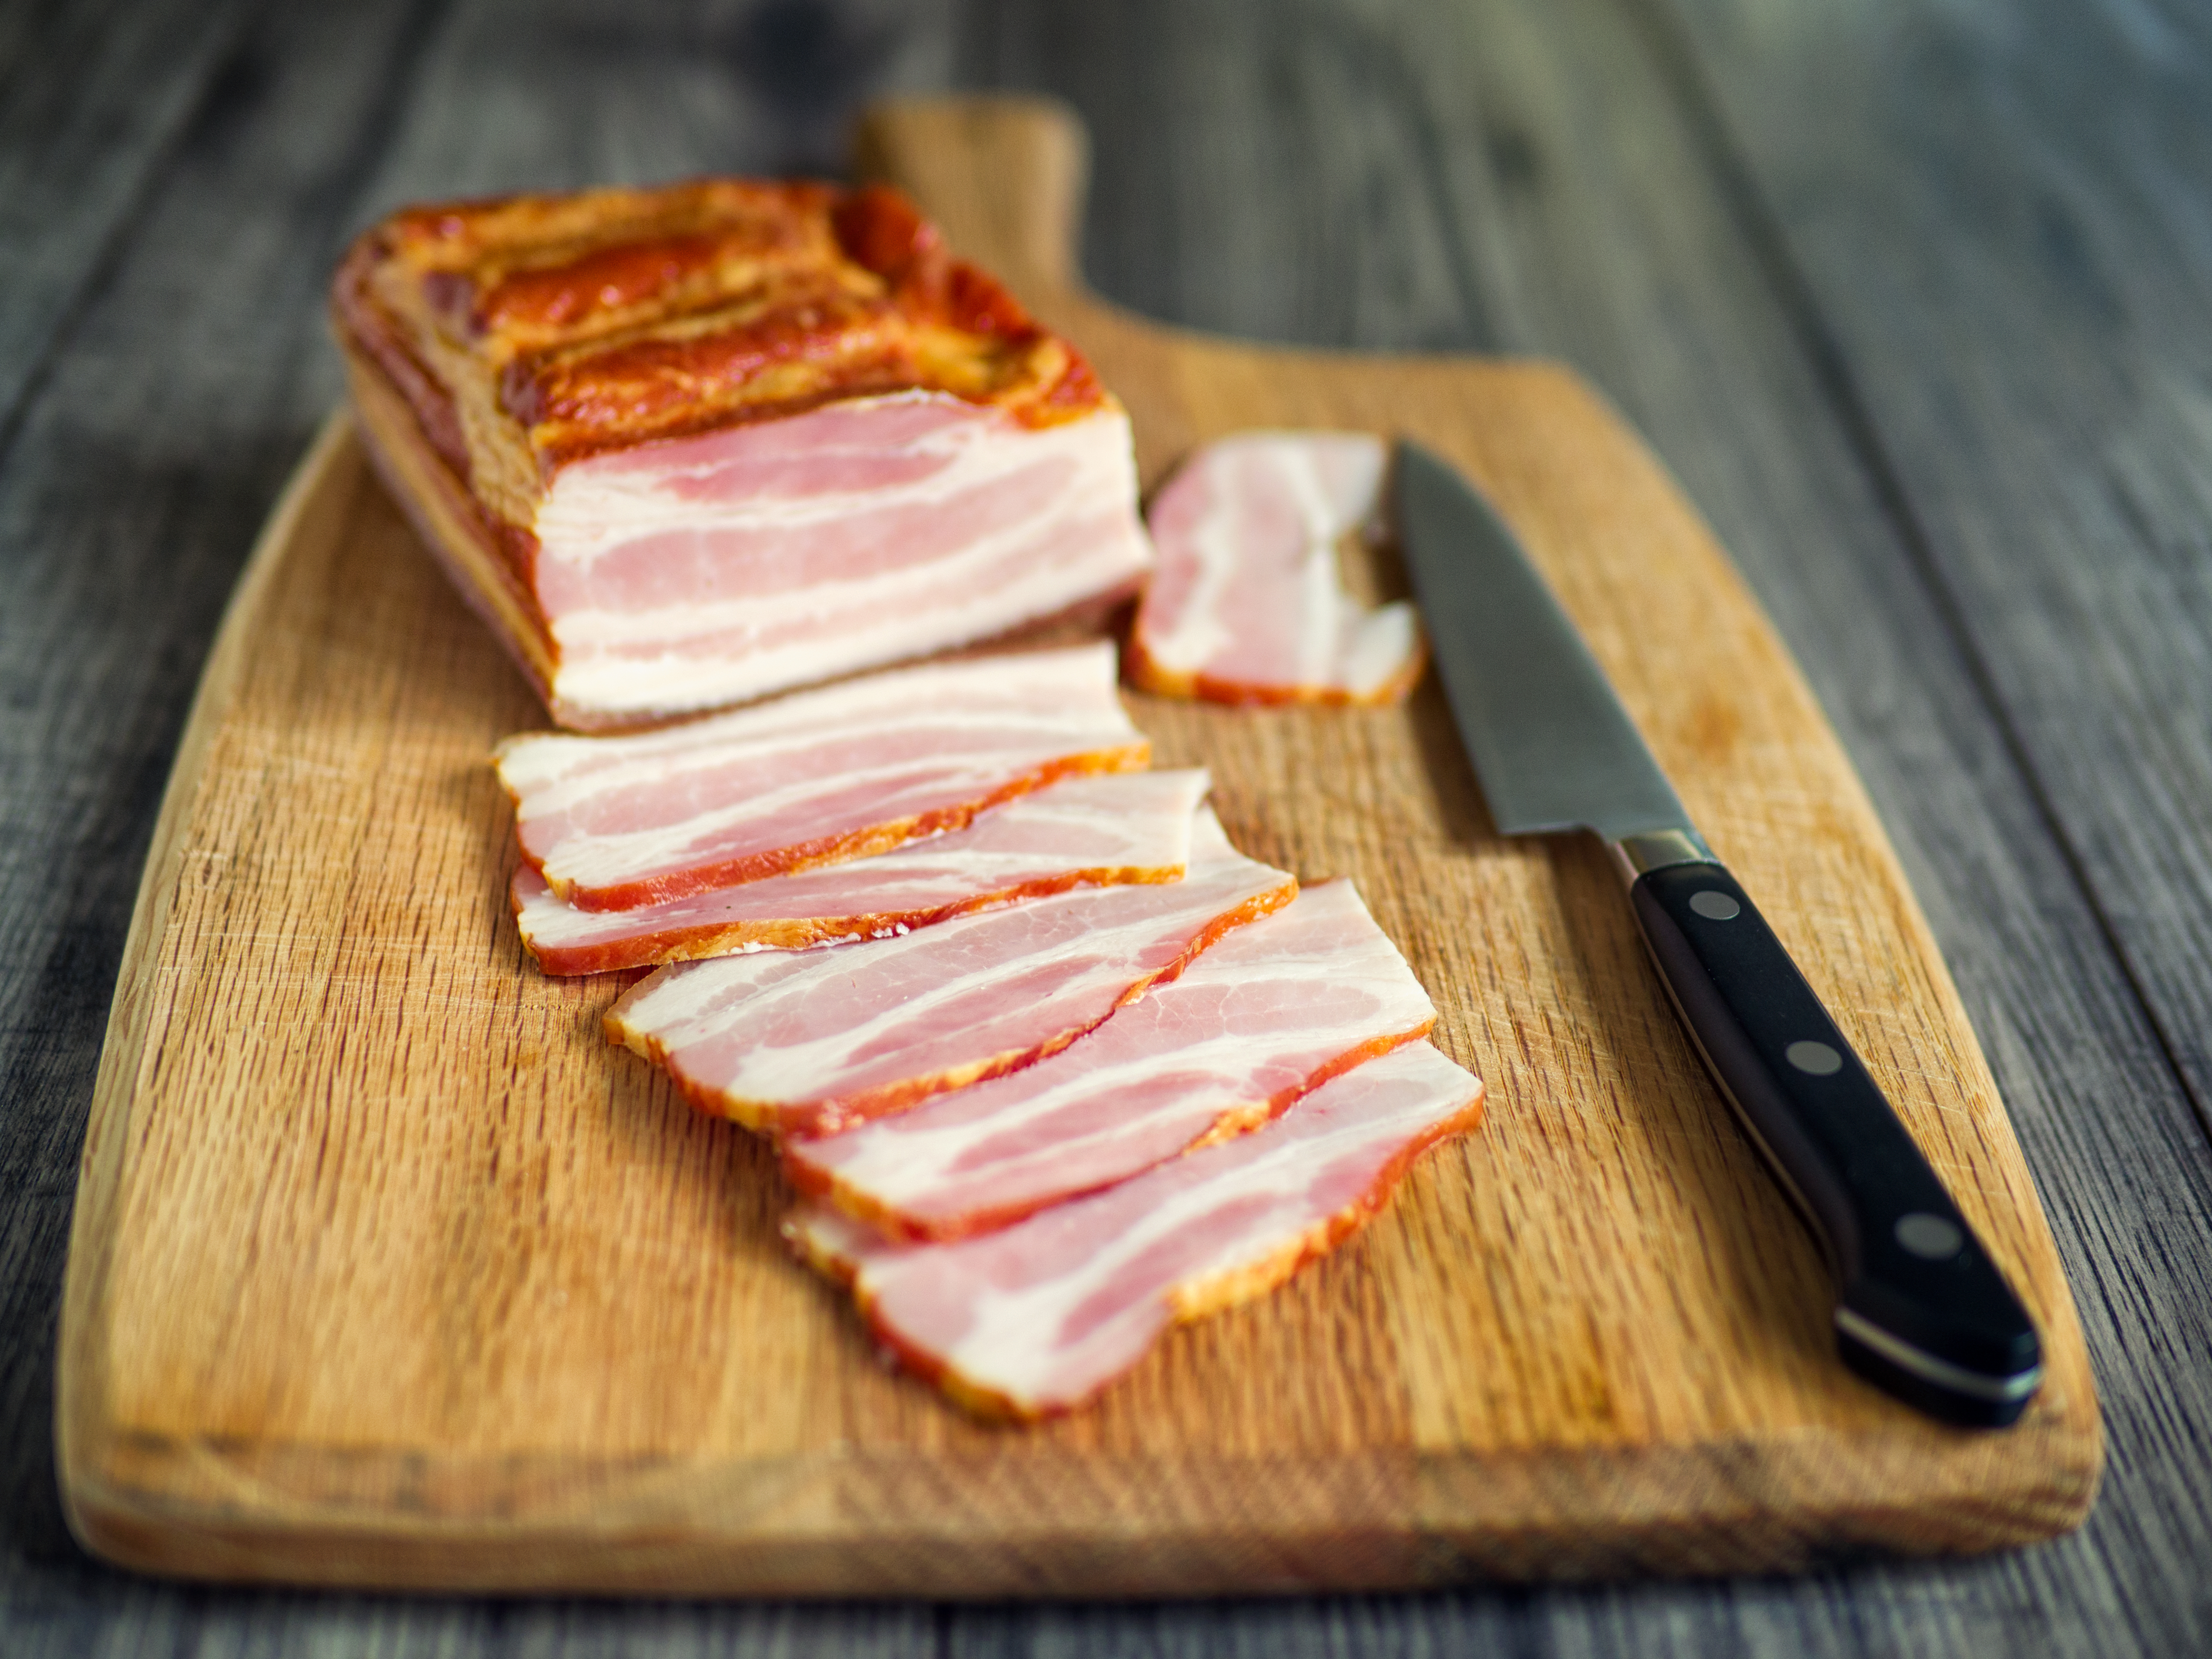 Bacon Nutrition Facts and Health Benefits